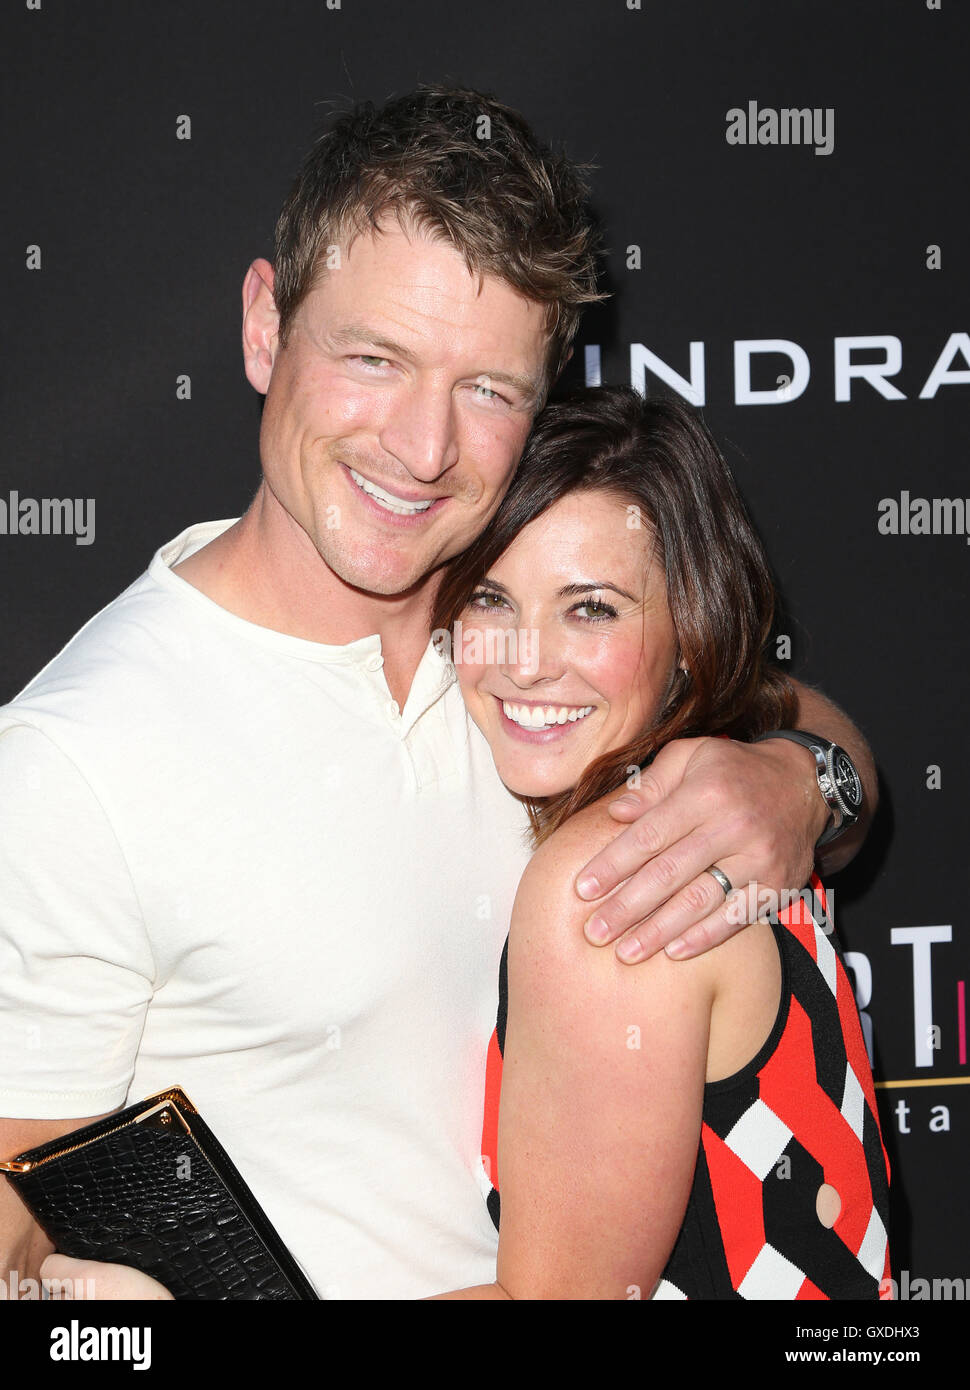 Philip Winchester And Megan Coughlin High Resolution Stock Photography and  Images - Alamy